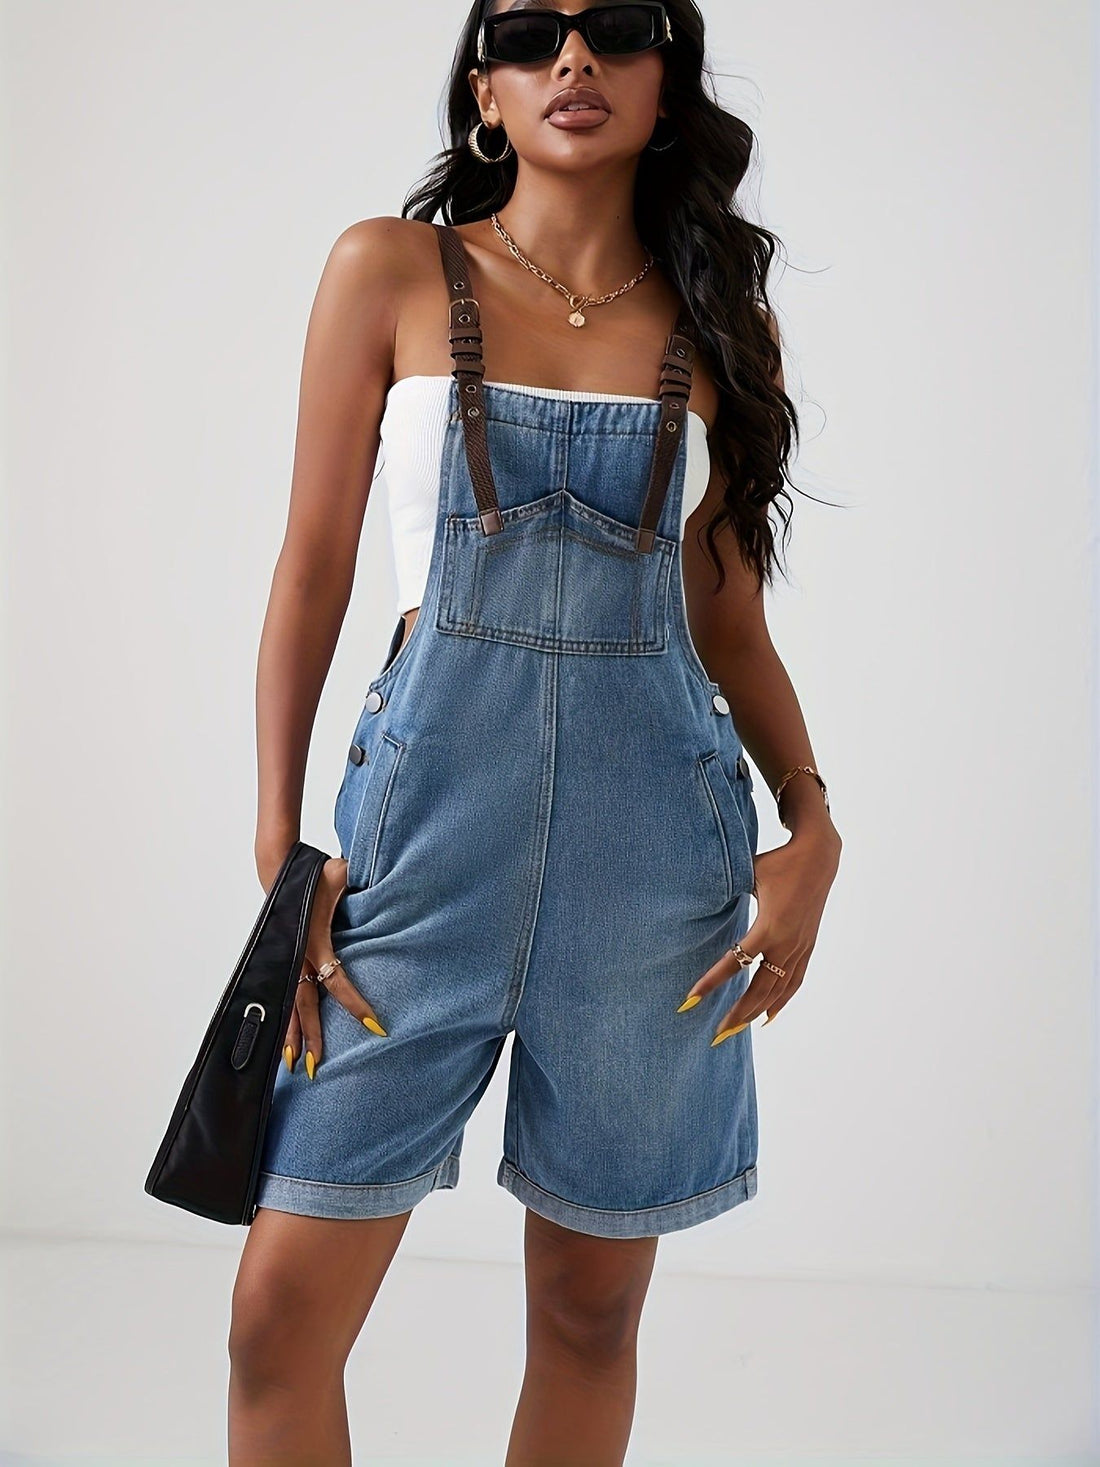 Blue Denim Jumpsuit with Bold Contrast Straps - Distressed Ripped Holes, Non-Stretch Romper - Fashionable Womens Clothing, Trendy Denim Statement - Fashionqueene.com